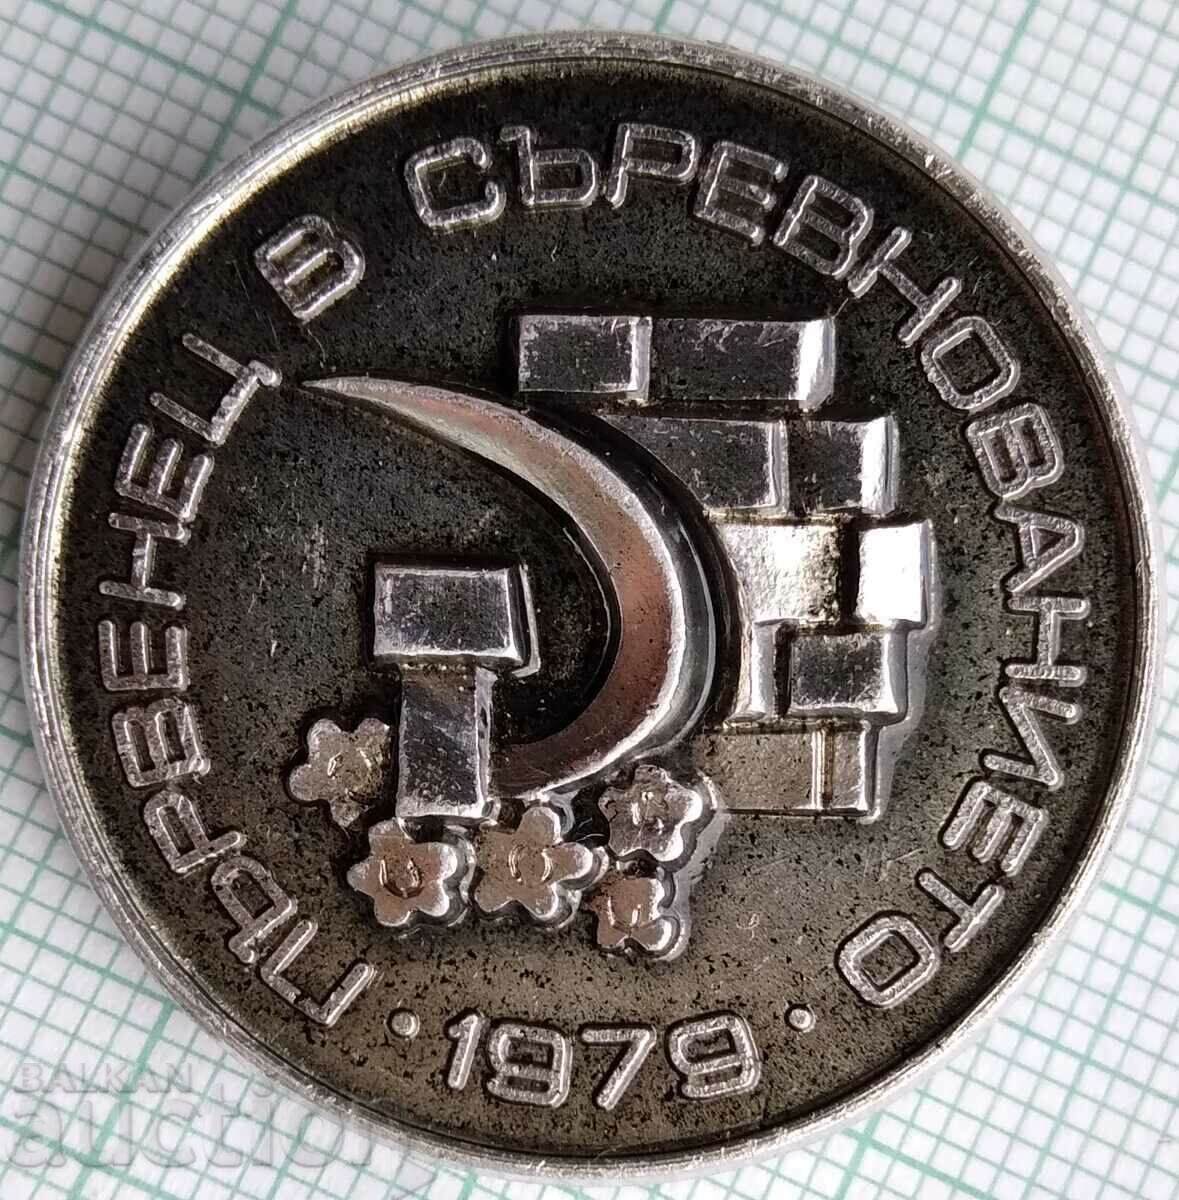 12978 Badge - Winner of the 1979 competition